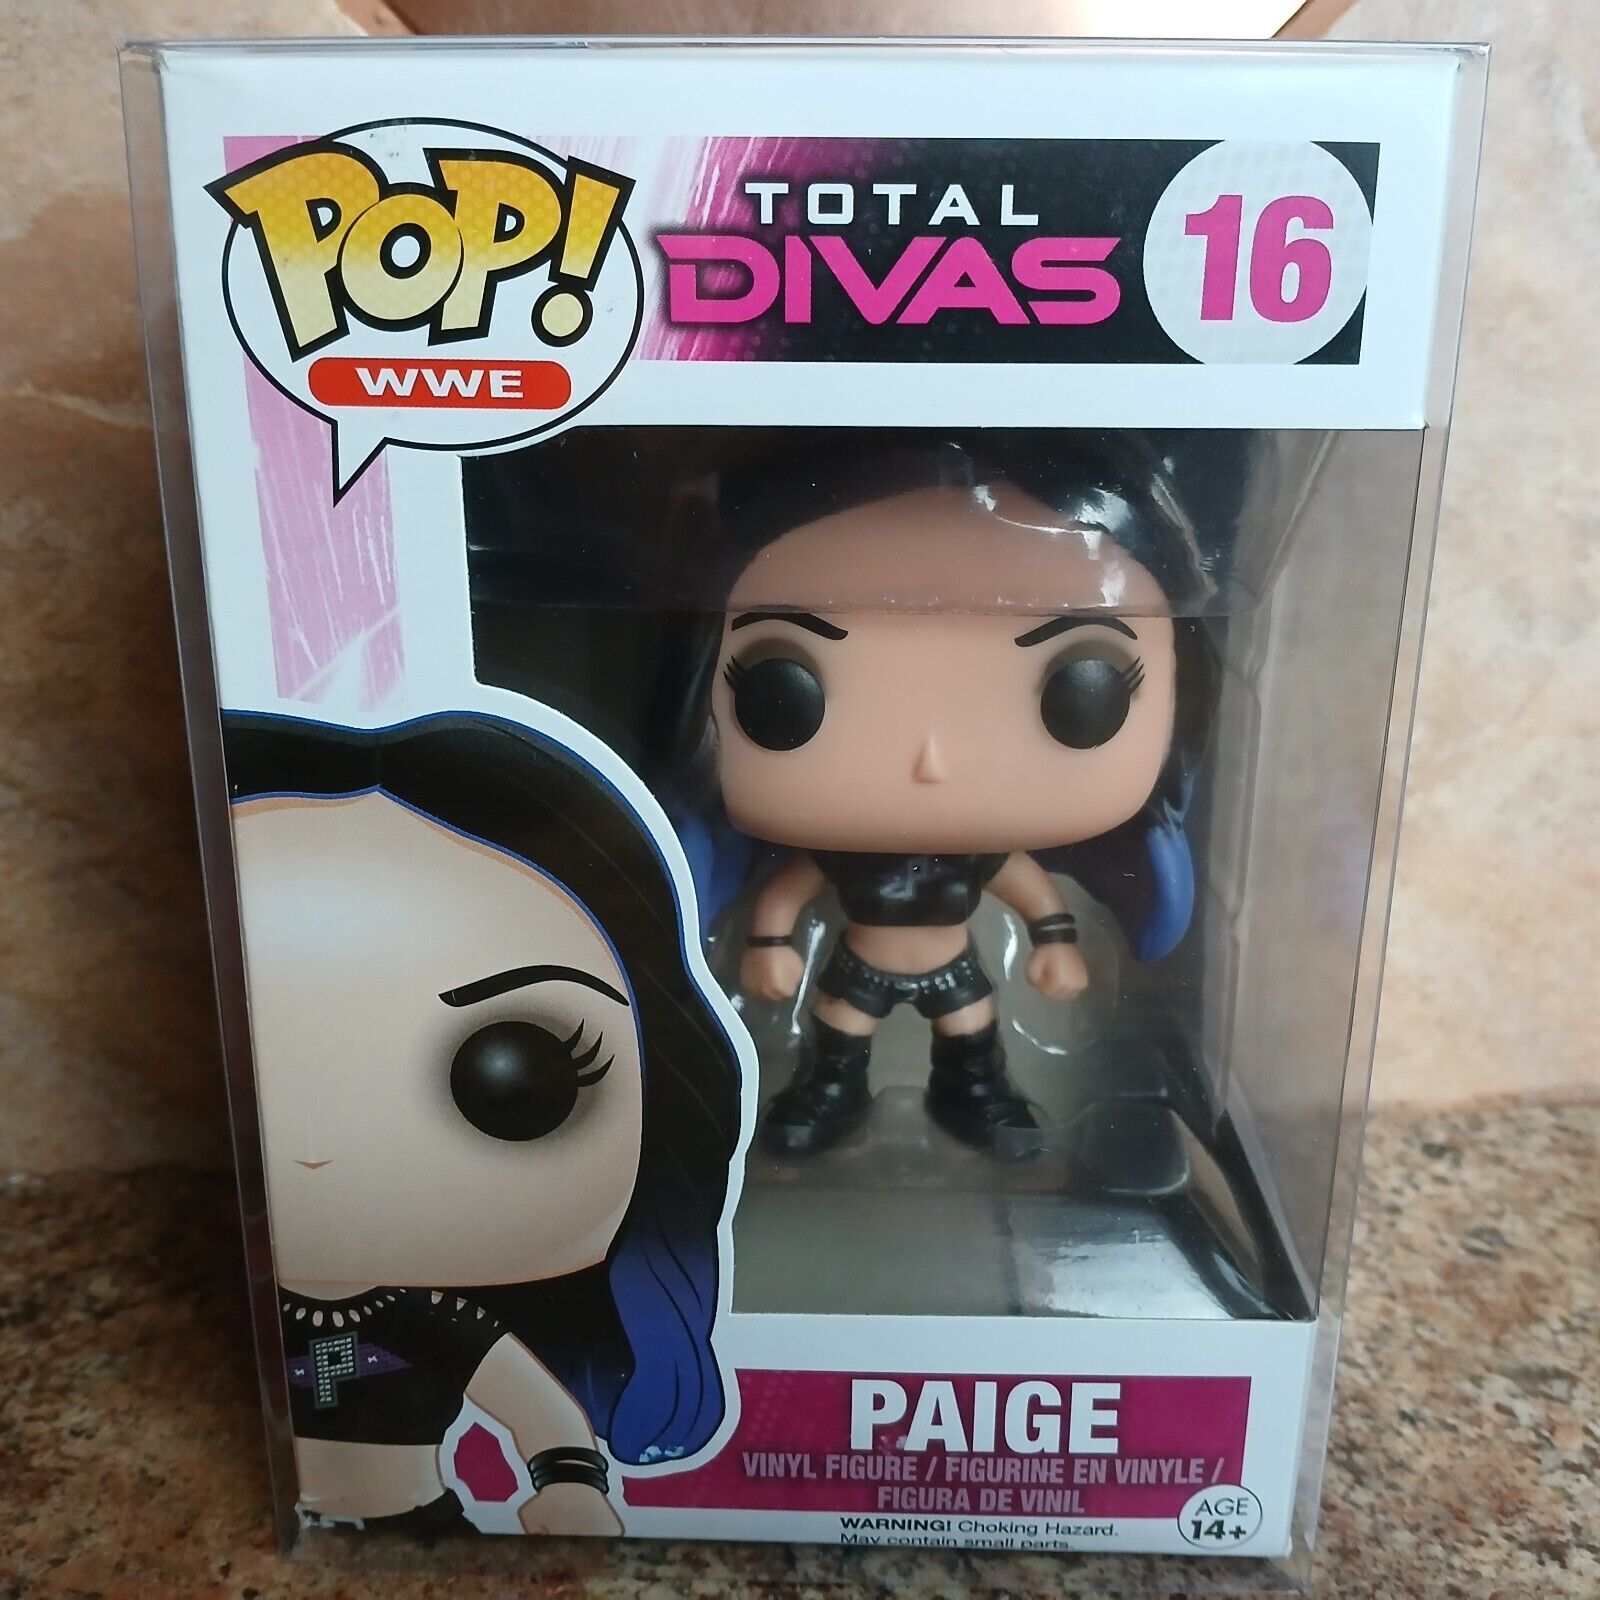 VAULTED Funko POP WWE TOTAL DIVAS 16 PIAGE Vinyl Figure with Protector DAMAGED